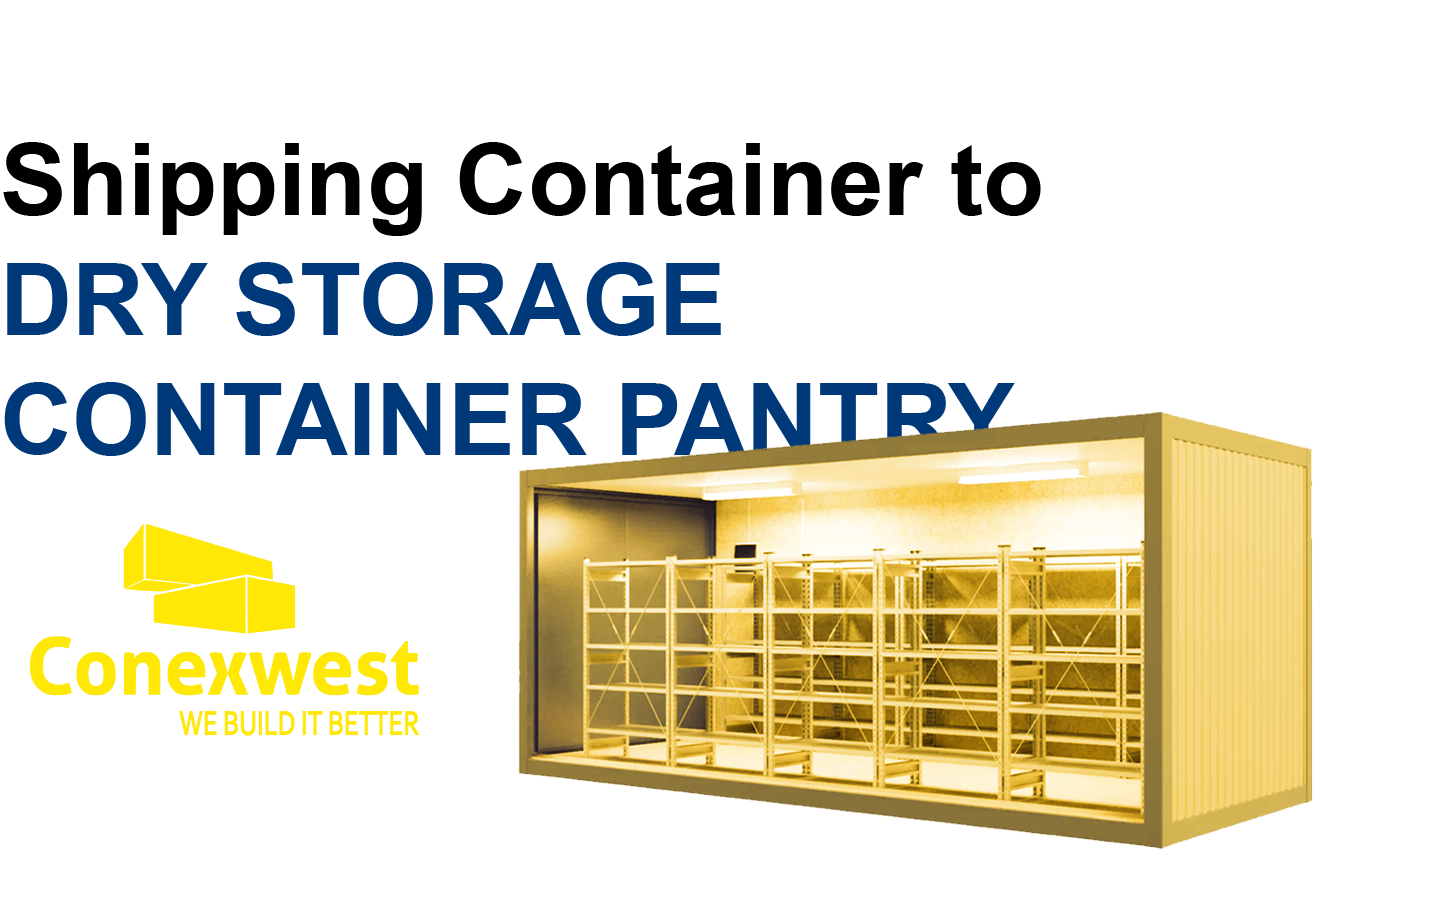 Dry storage container pantry